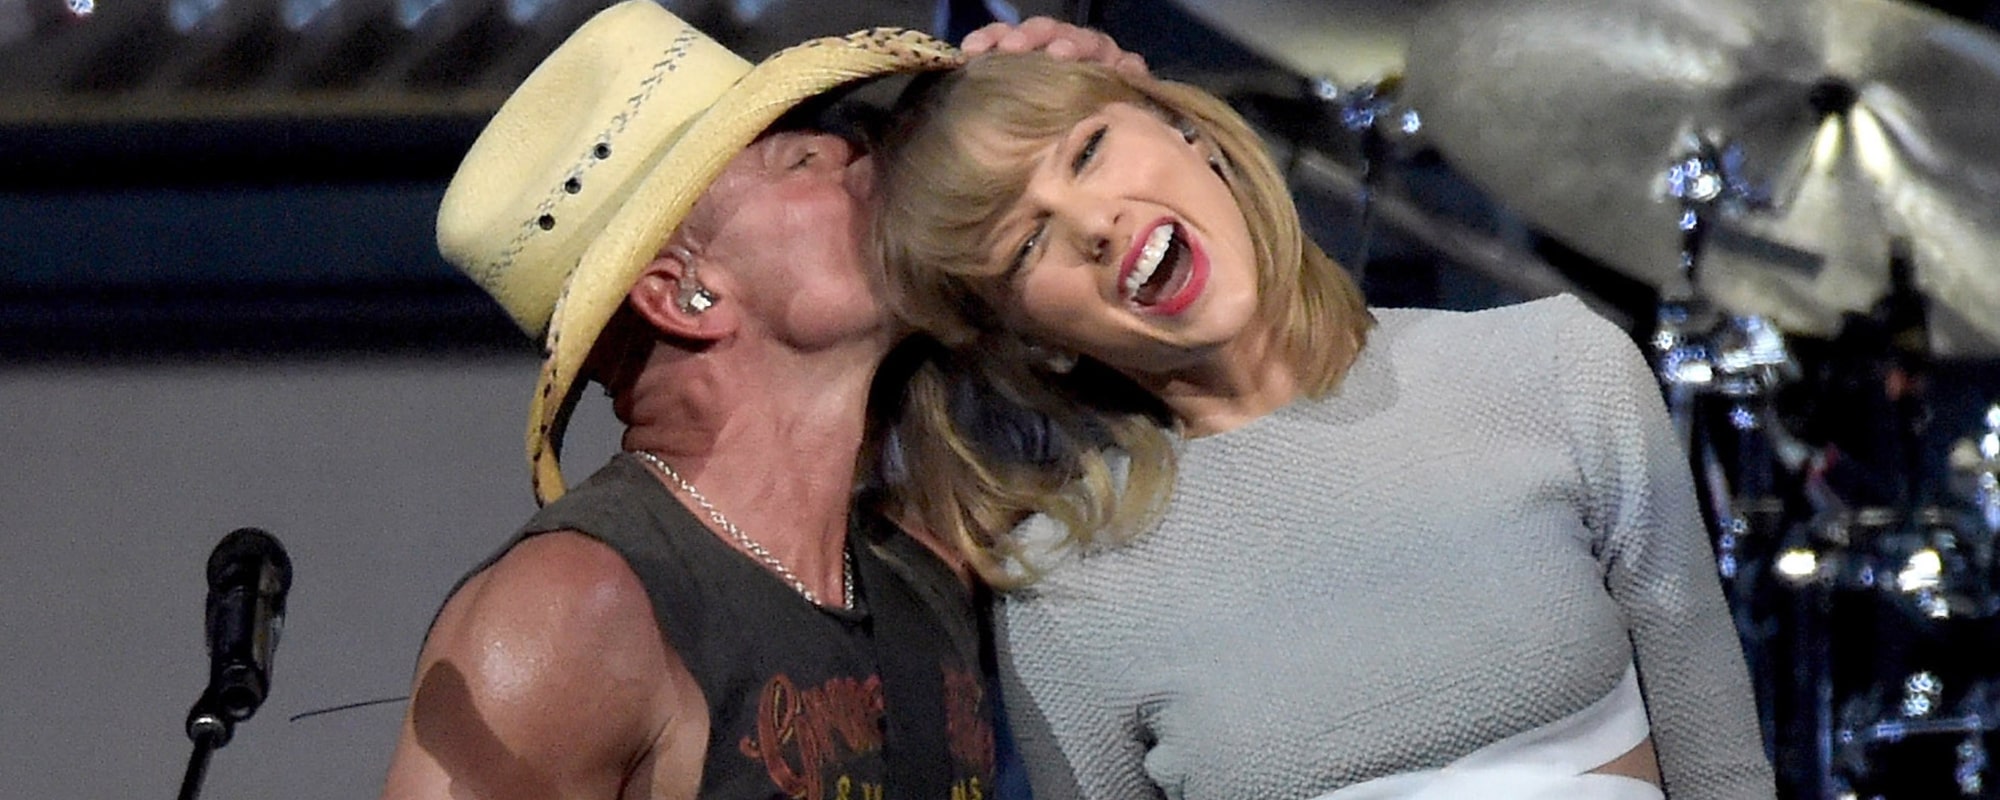 Kenny Chesney Gushes Over Taylor Swift After ‘Time’ Person of the Year Nod: “A Gift Not Everyone Has”